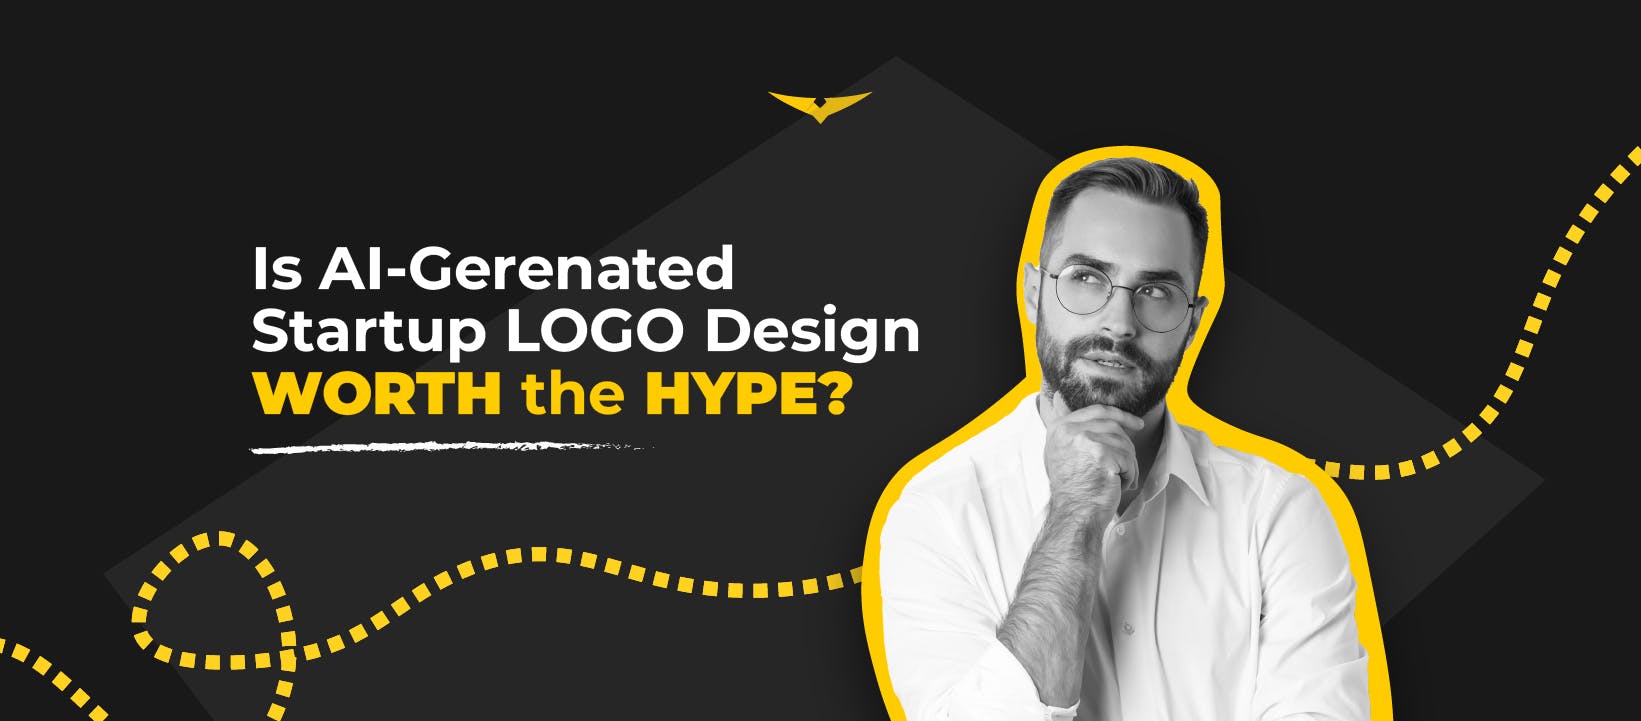 Is AI-Generated Startup Logo Design Worth the Hype?